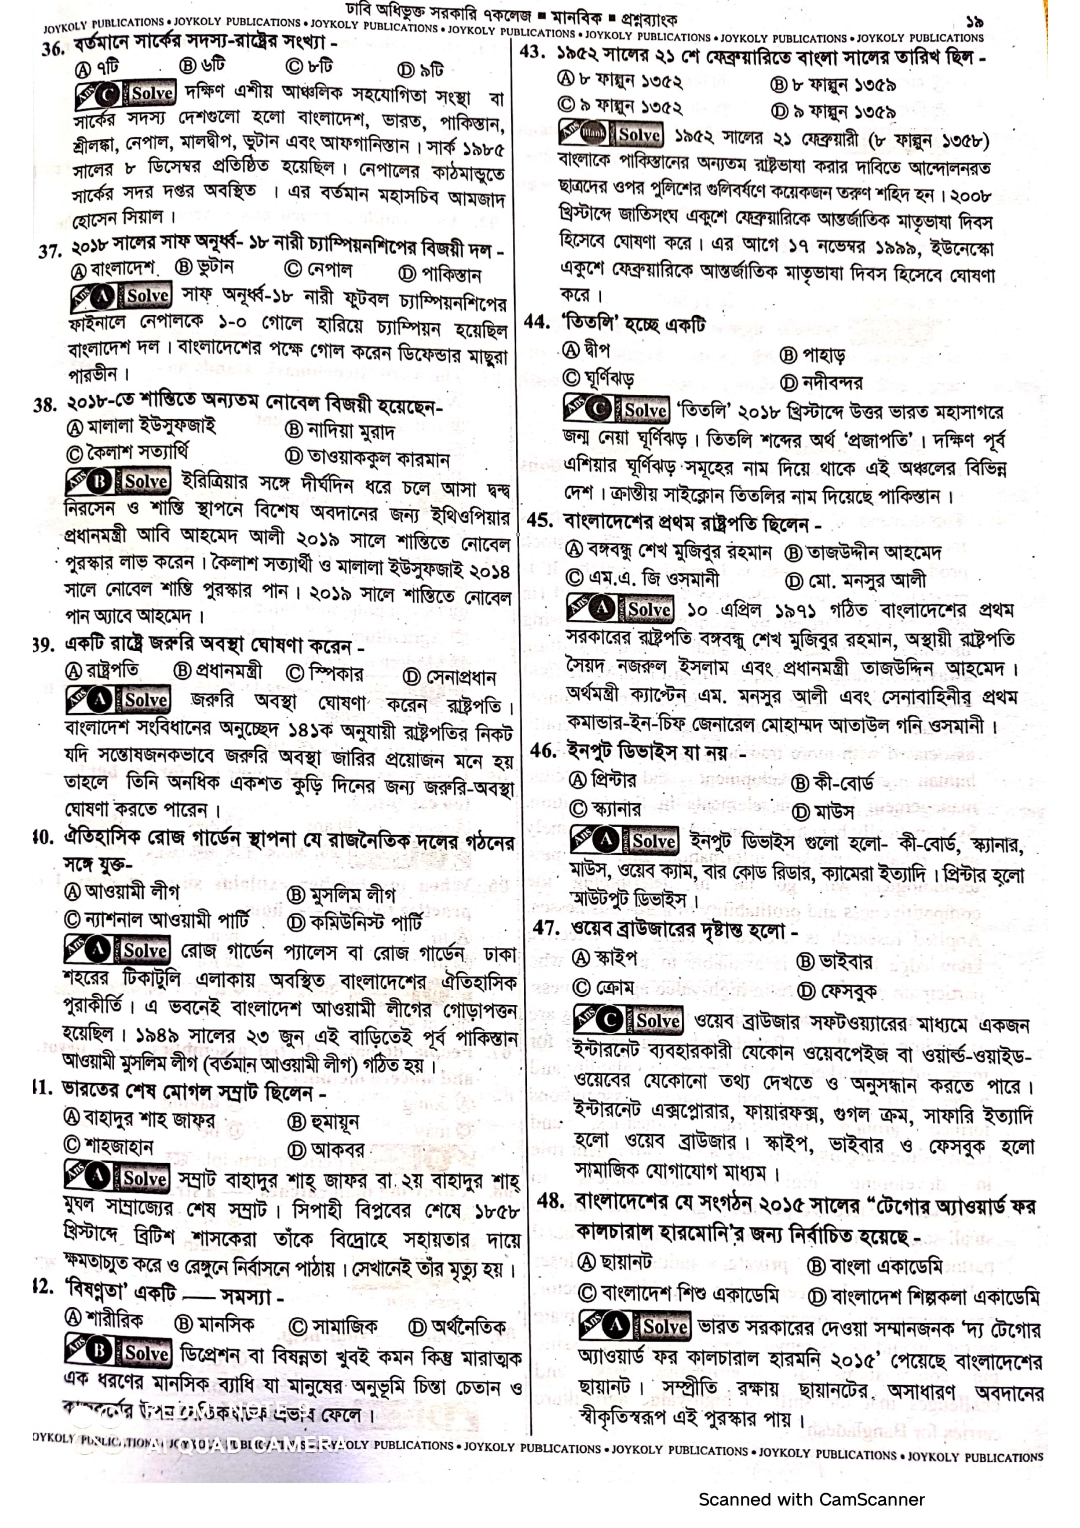 Question Bank: Dhaka University  Affiliated 7 College 'B' Unit Admission Test Questions and Solutions 2018-2019 Academic Year